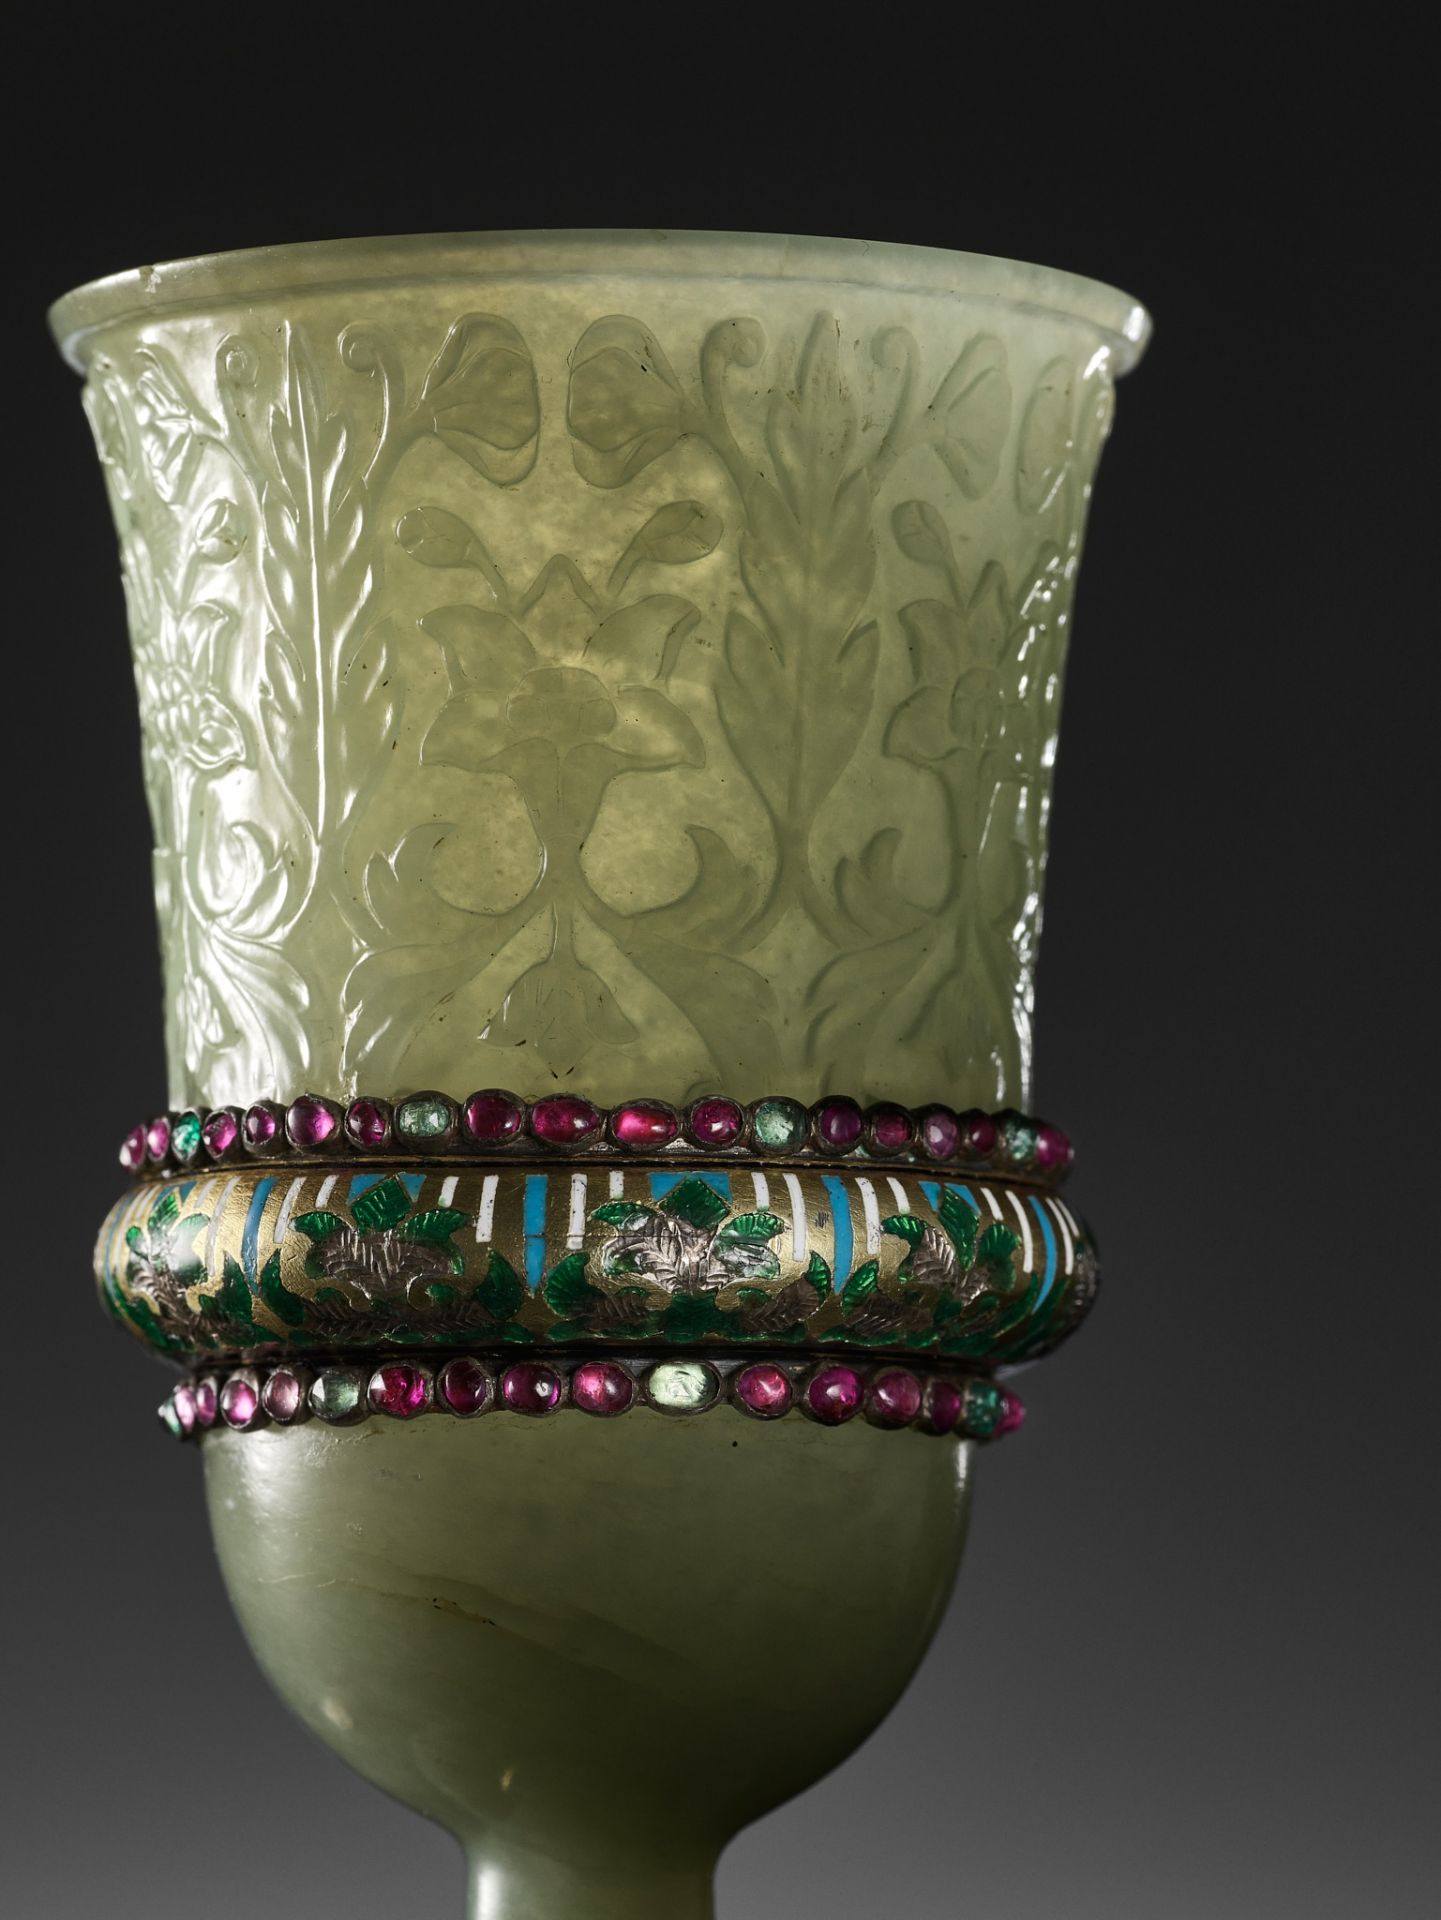 A MUGHAL GILT AND 'GEM'-INLAID JADE STEM CUP, INDIA, 18TH CENTURY - Image 2 of 11